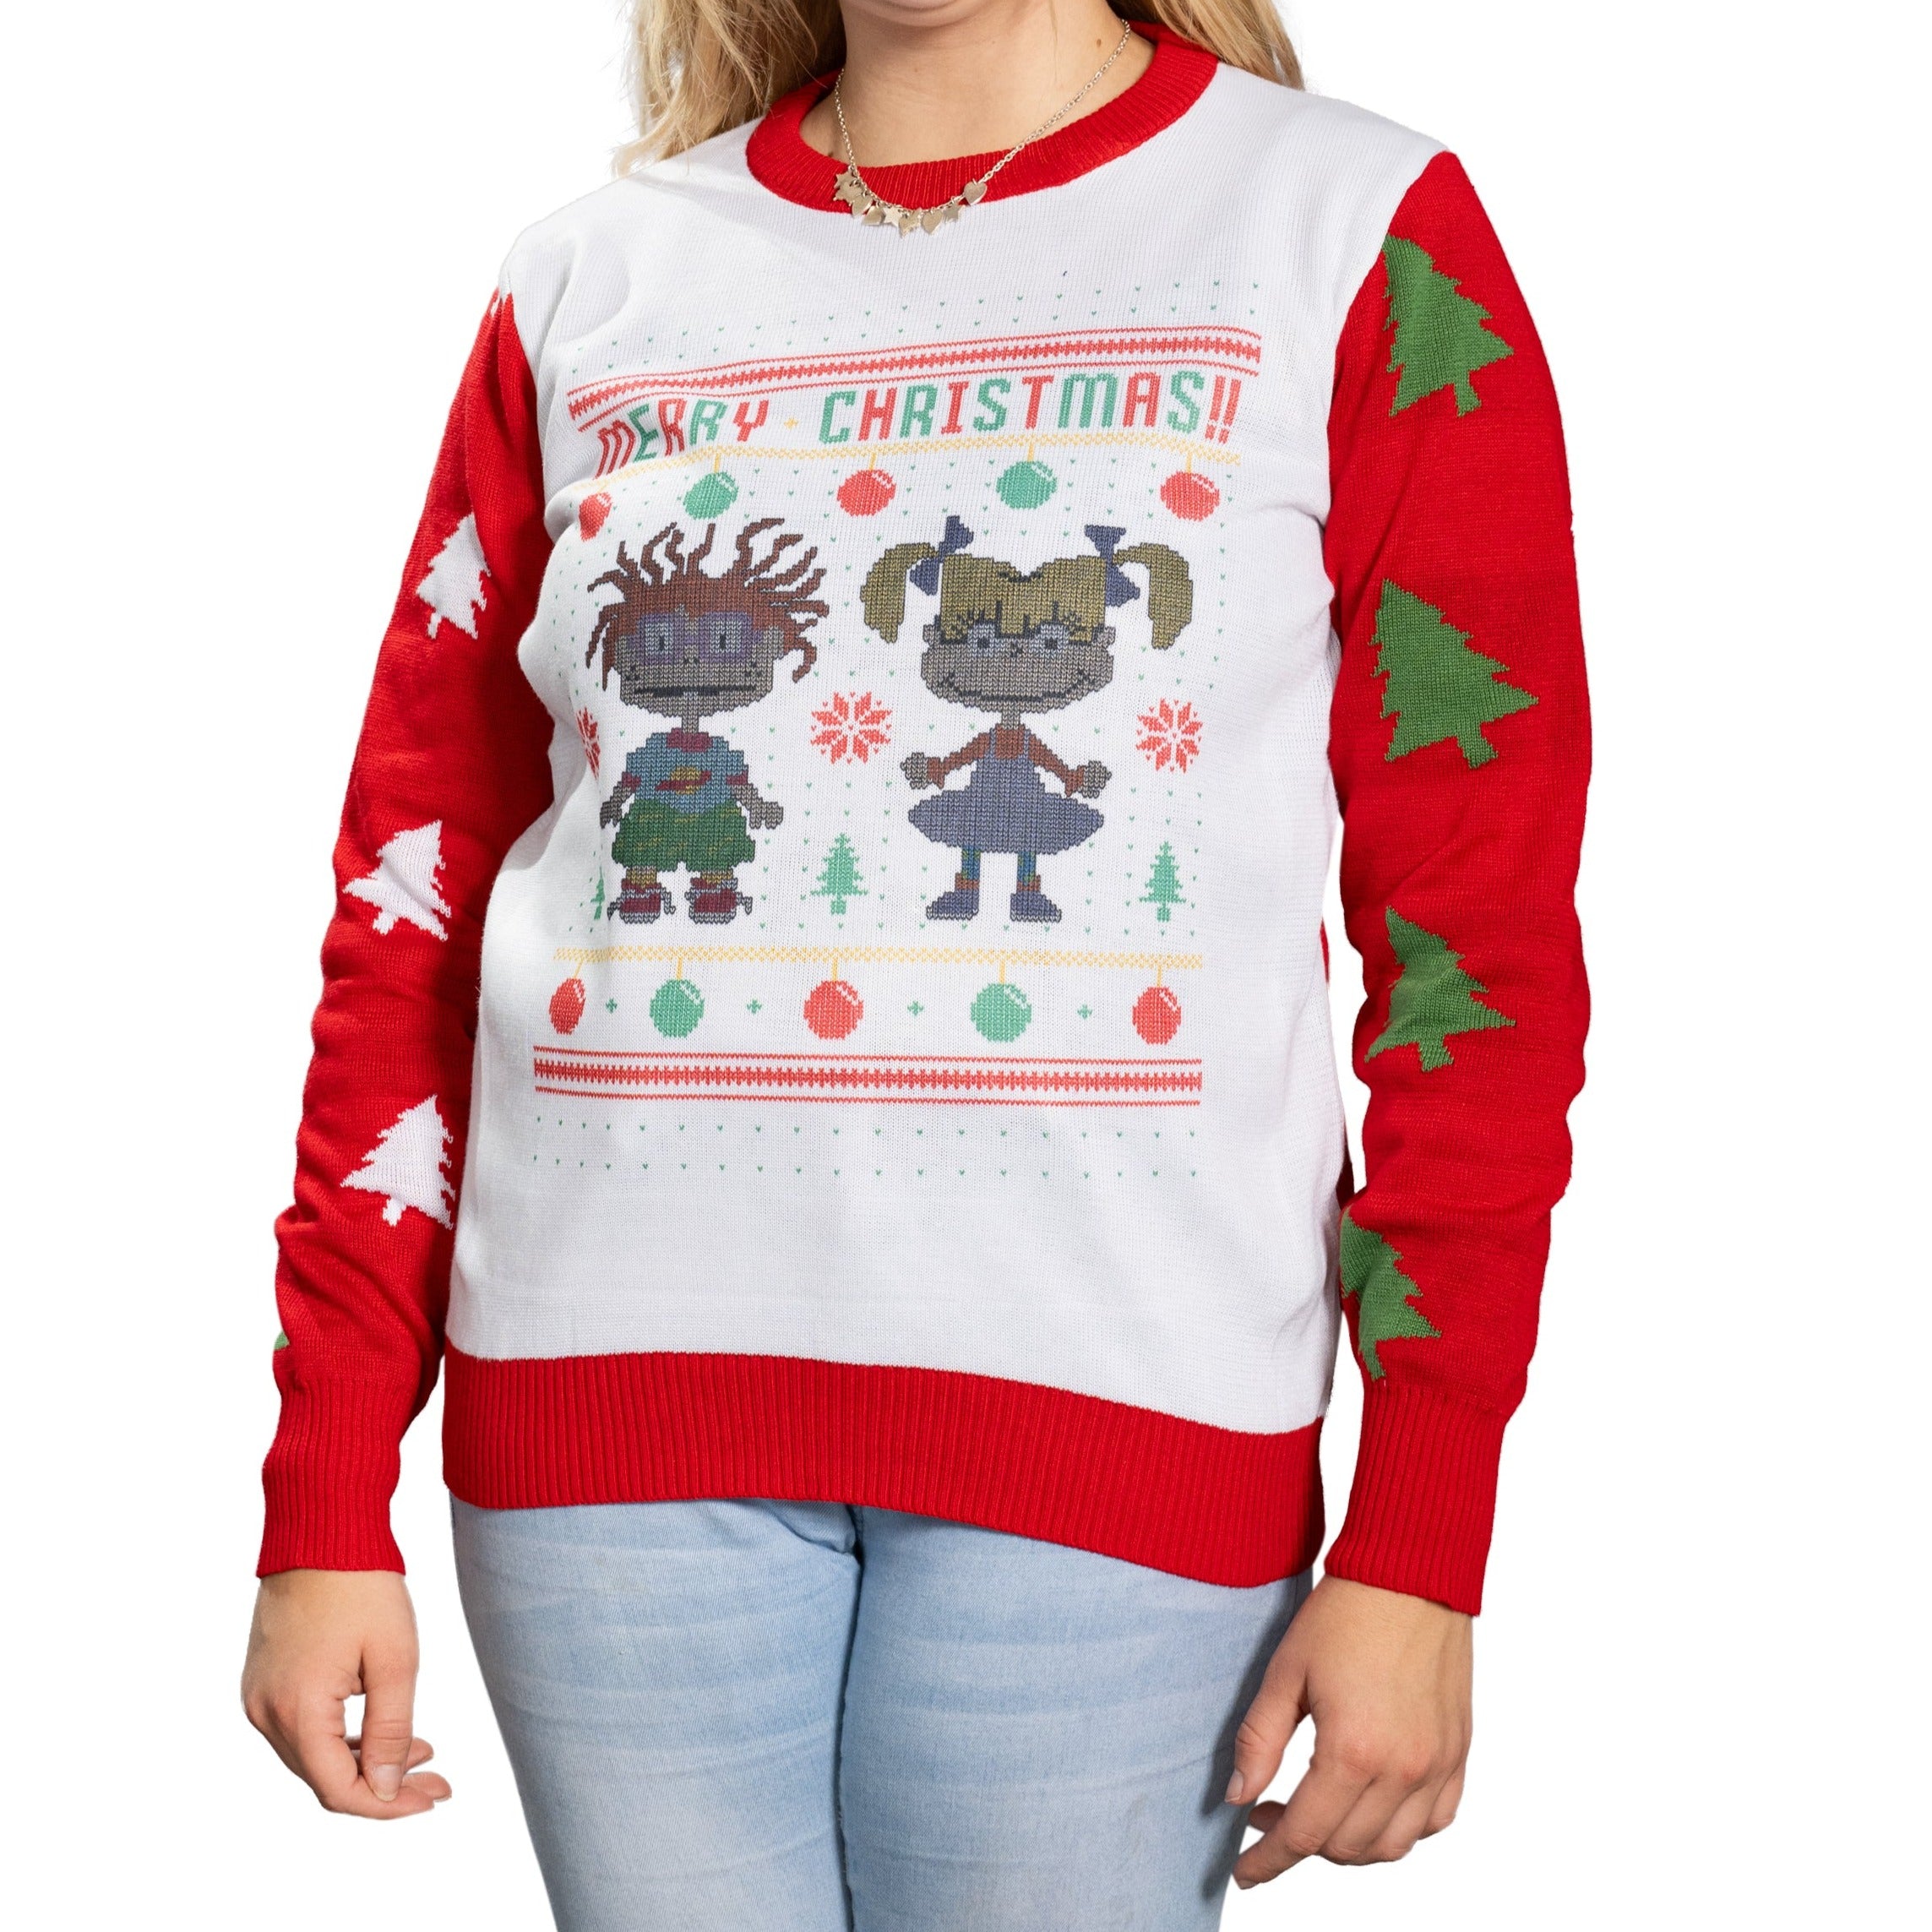 Merry Christmas Rugrats Sweater